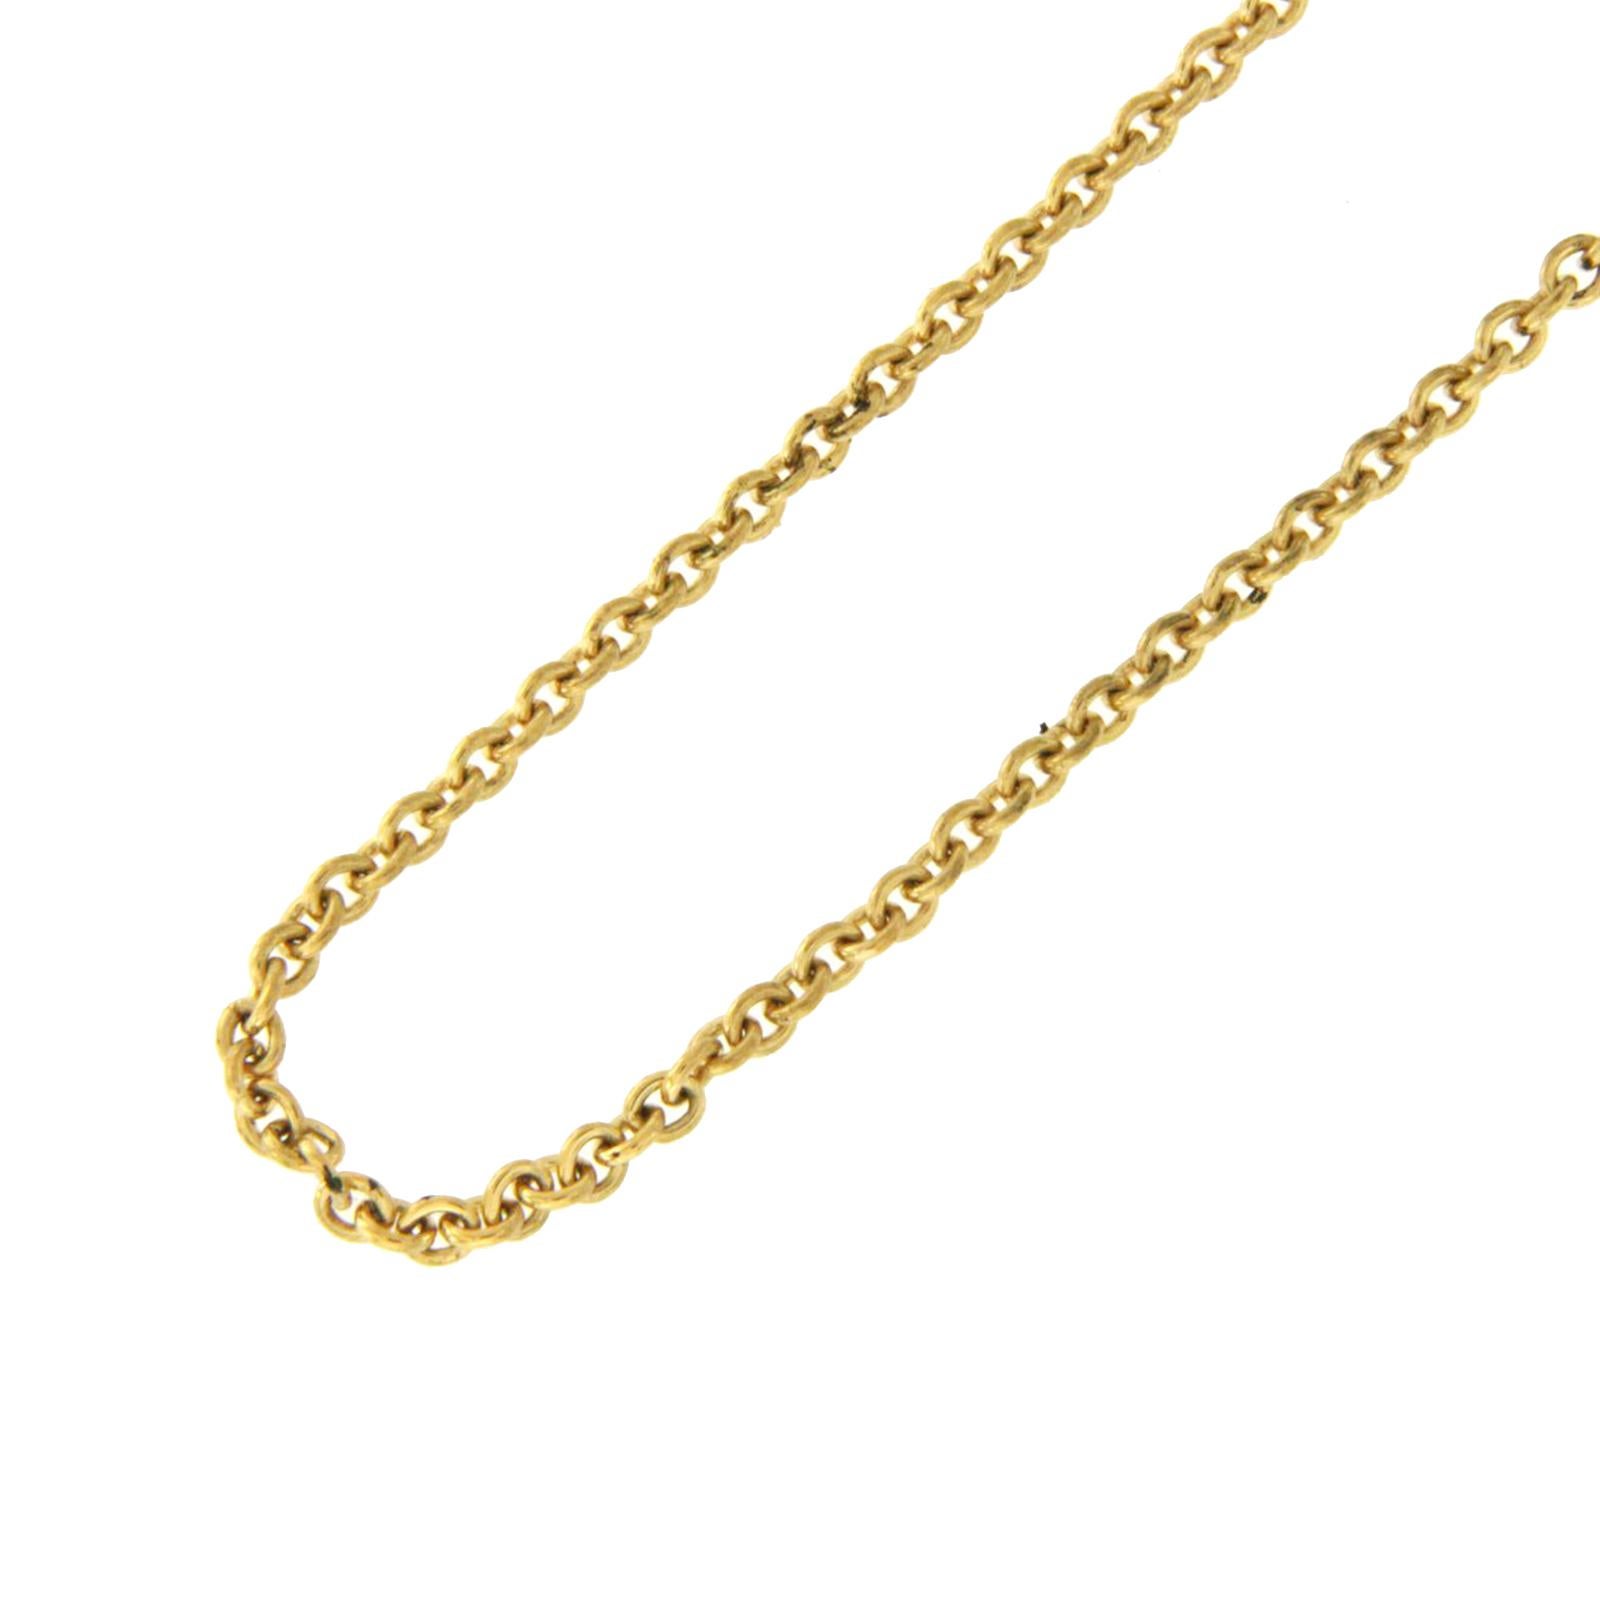 Chopard 18 Karat Yellow Gold Rolo Chain Necklace 2